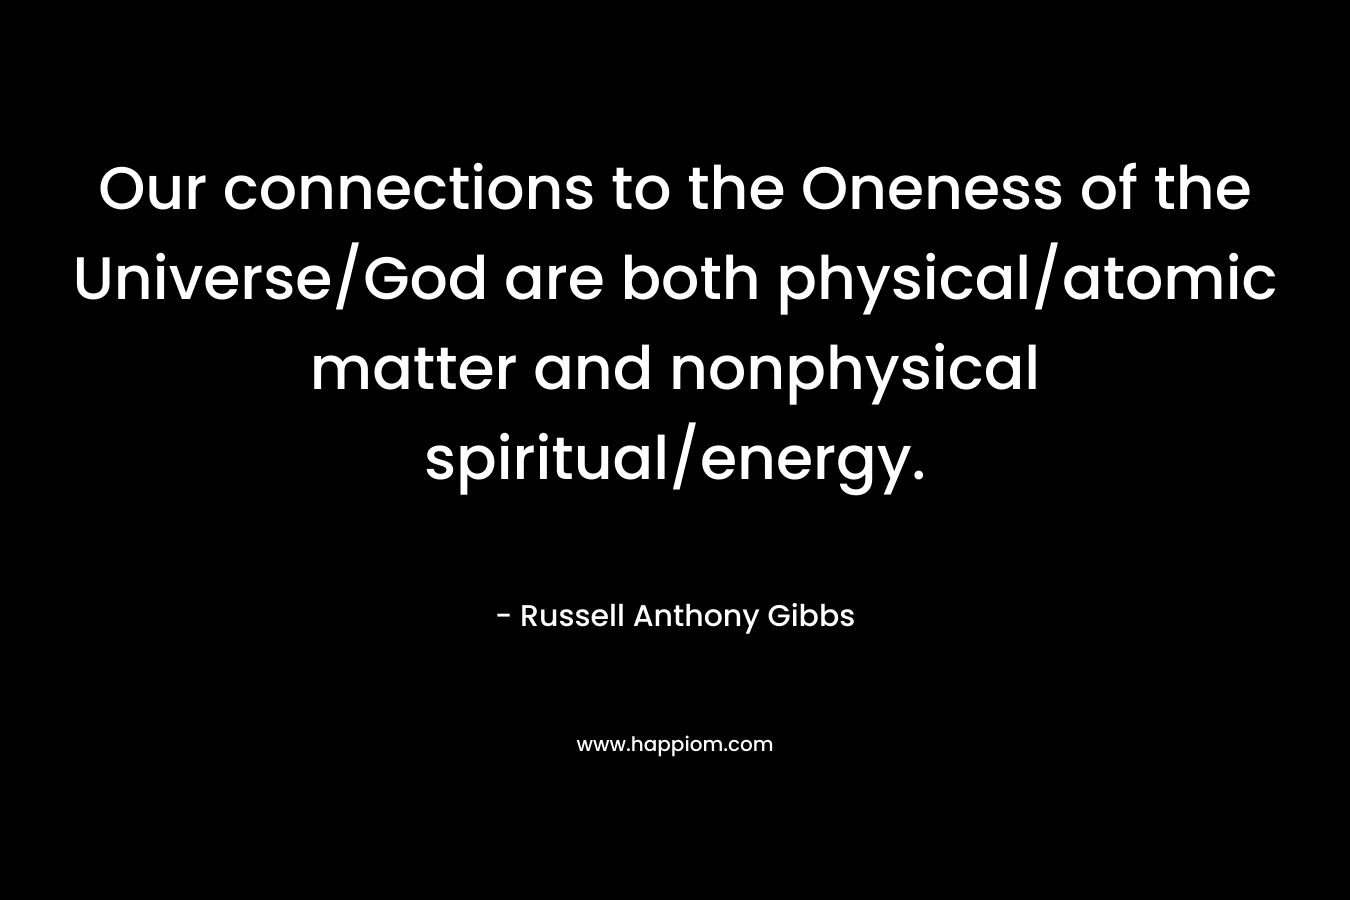 Our connections to the Oneness of the Universe/God are both physical/atomic matter and nonphysical spiritual/energy.